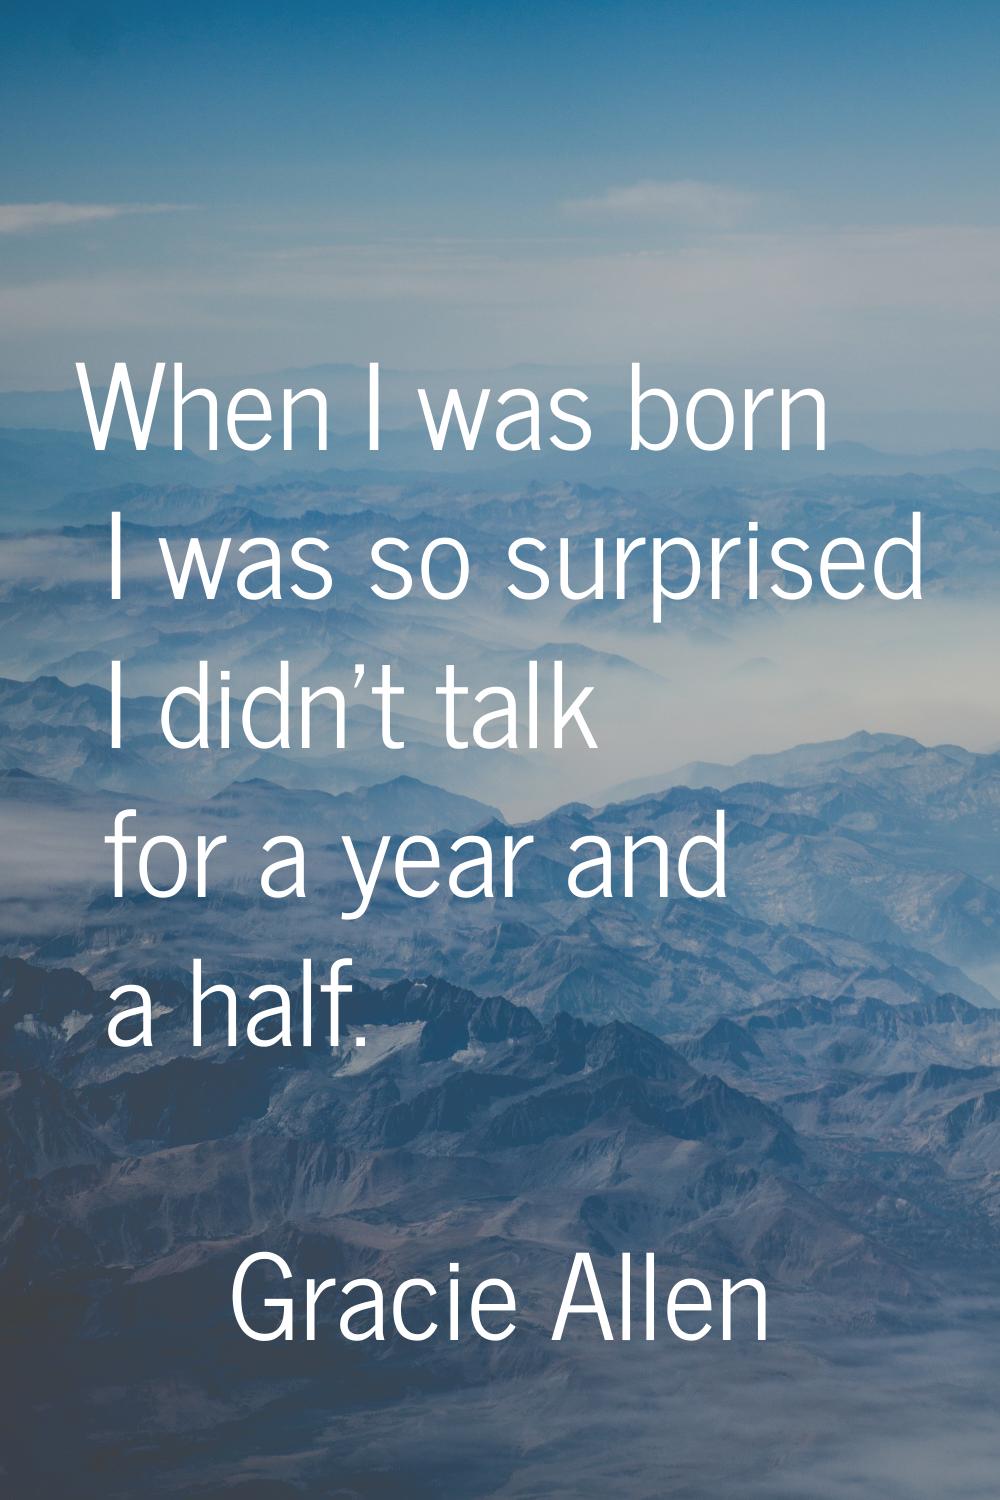 When I was born I was so surprised I didn't talk for a year and a half.